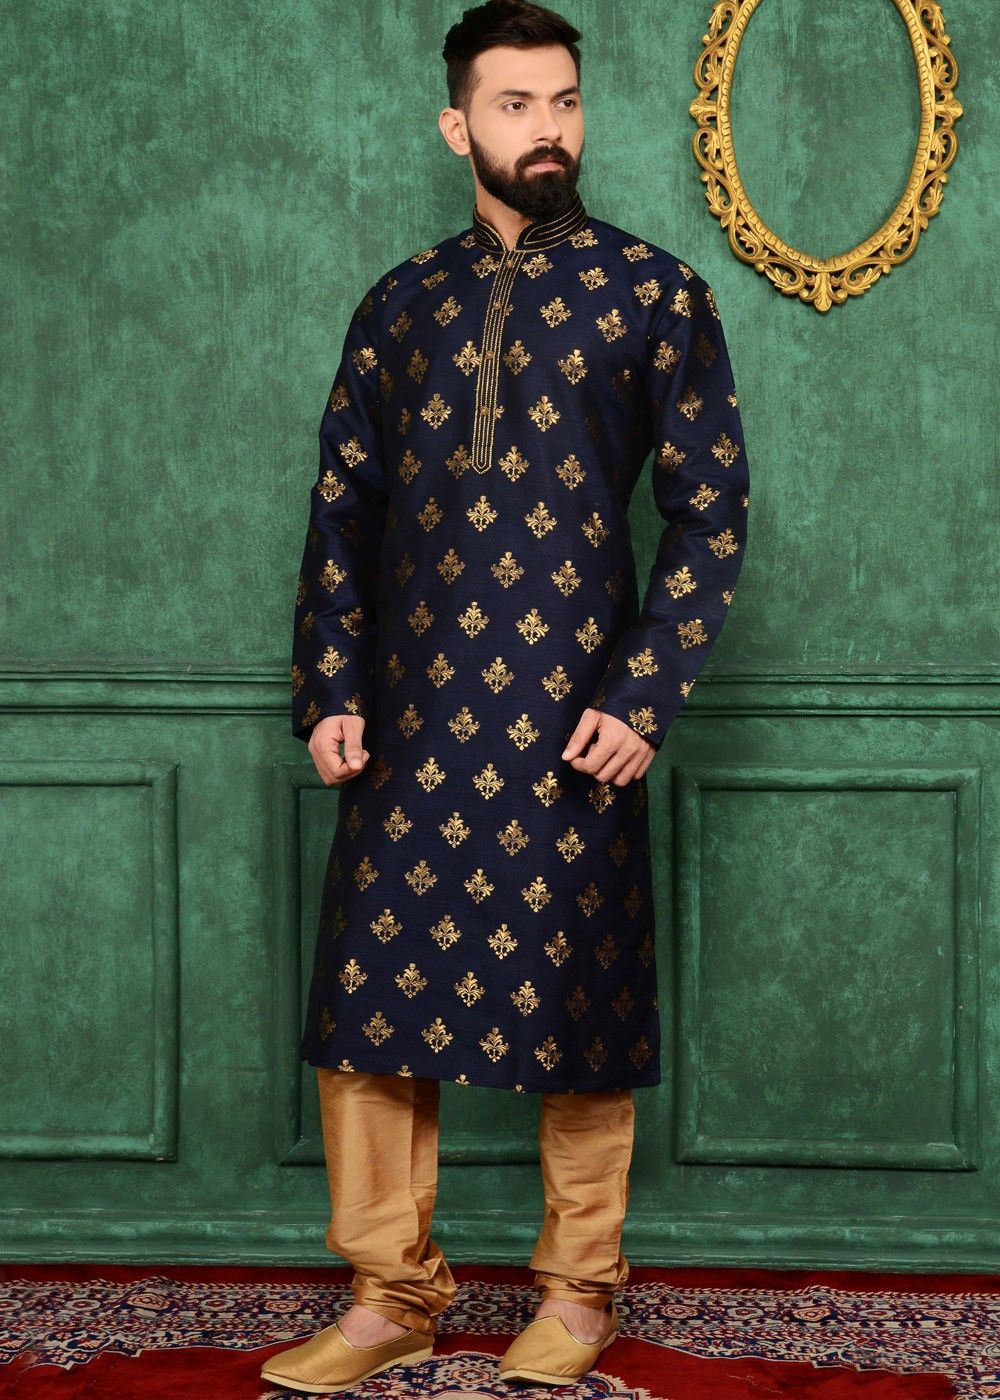 Details about   Blue Cotton Readymade Ethnic Indian Kurta Pajama for Men